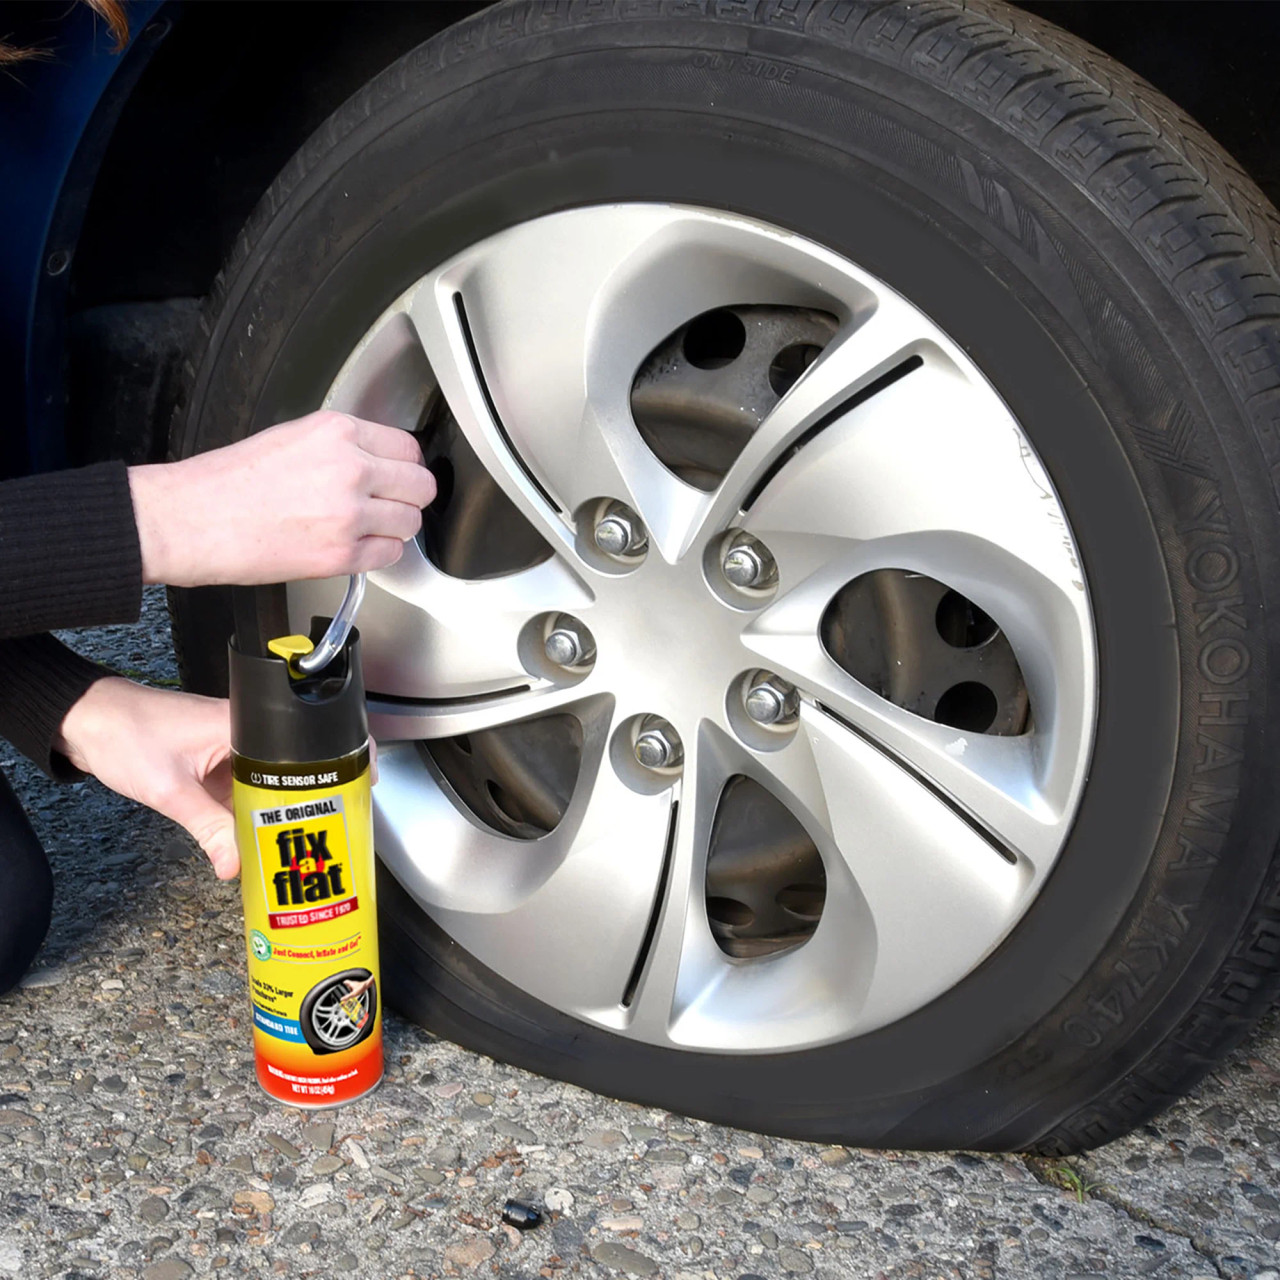 Buy Fix-A-Flat Tire Puncture Sealer and Inflator 16 Oz.